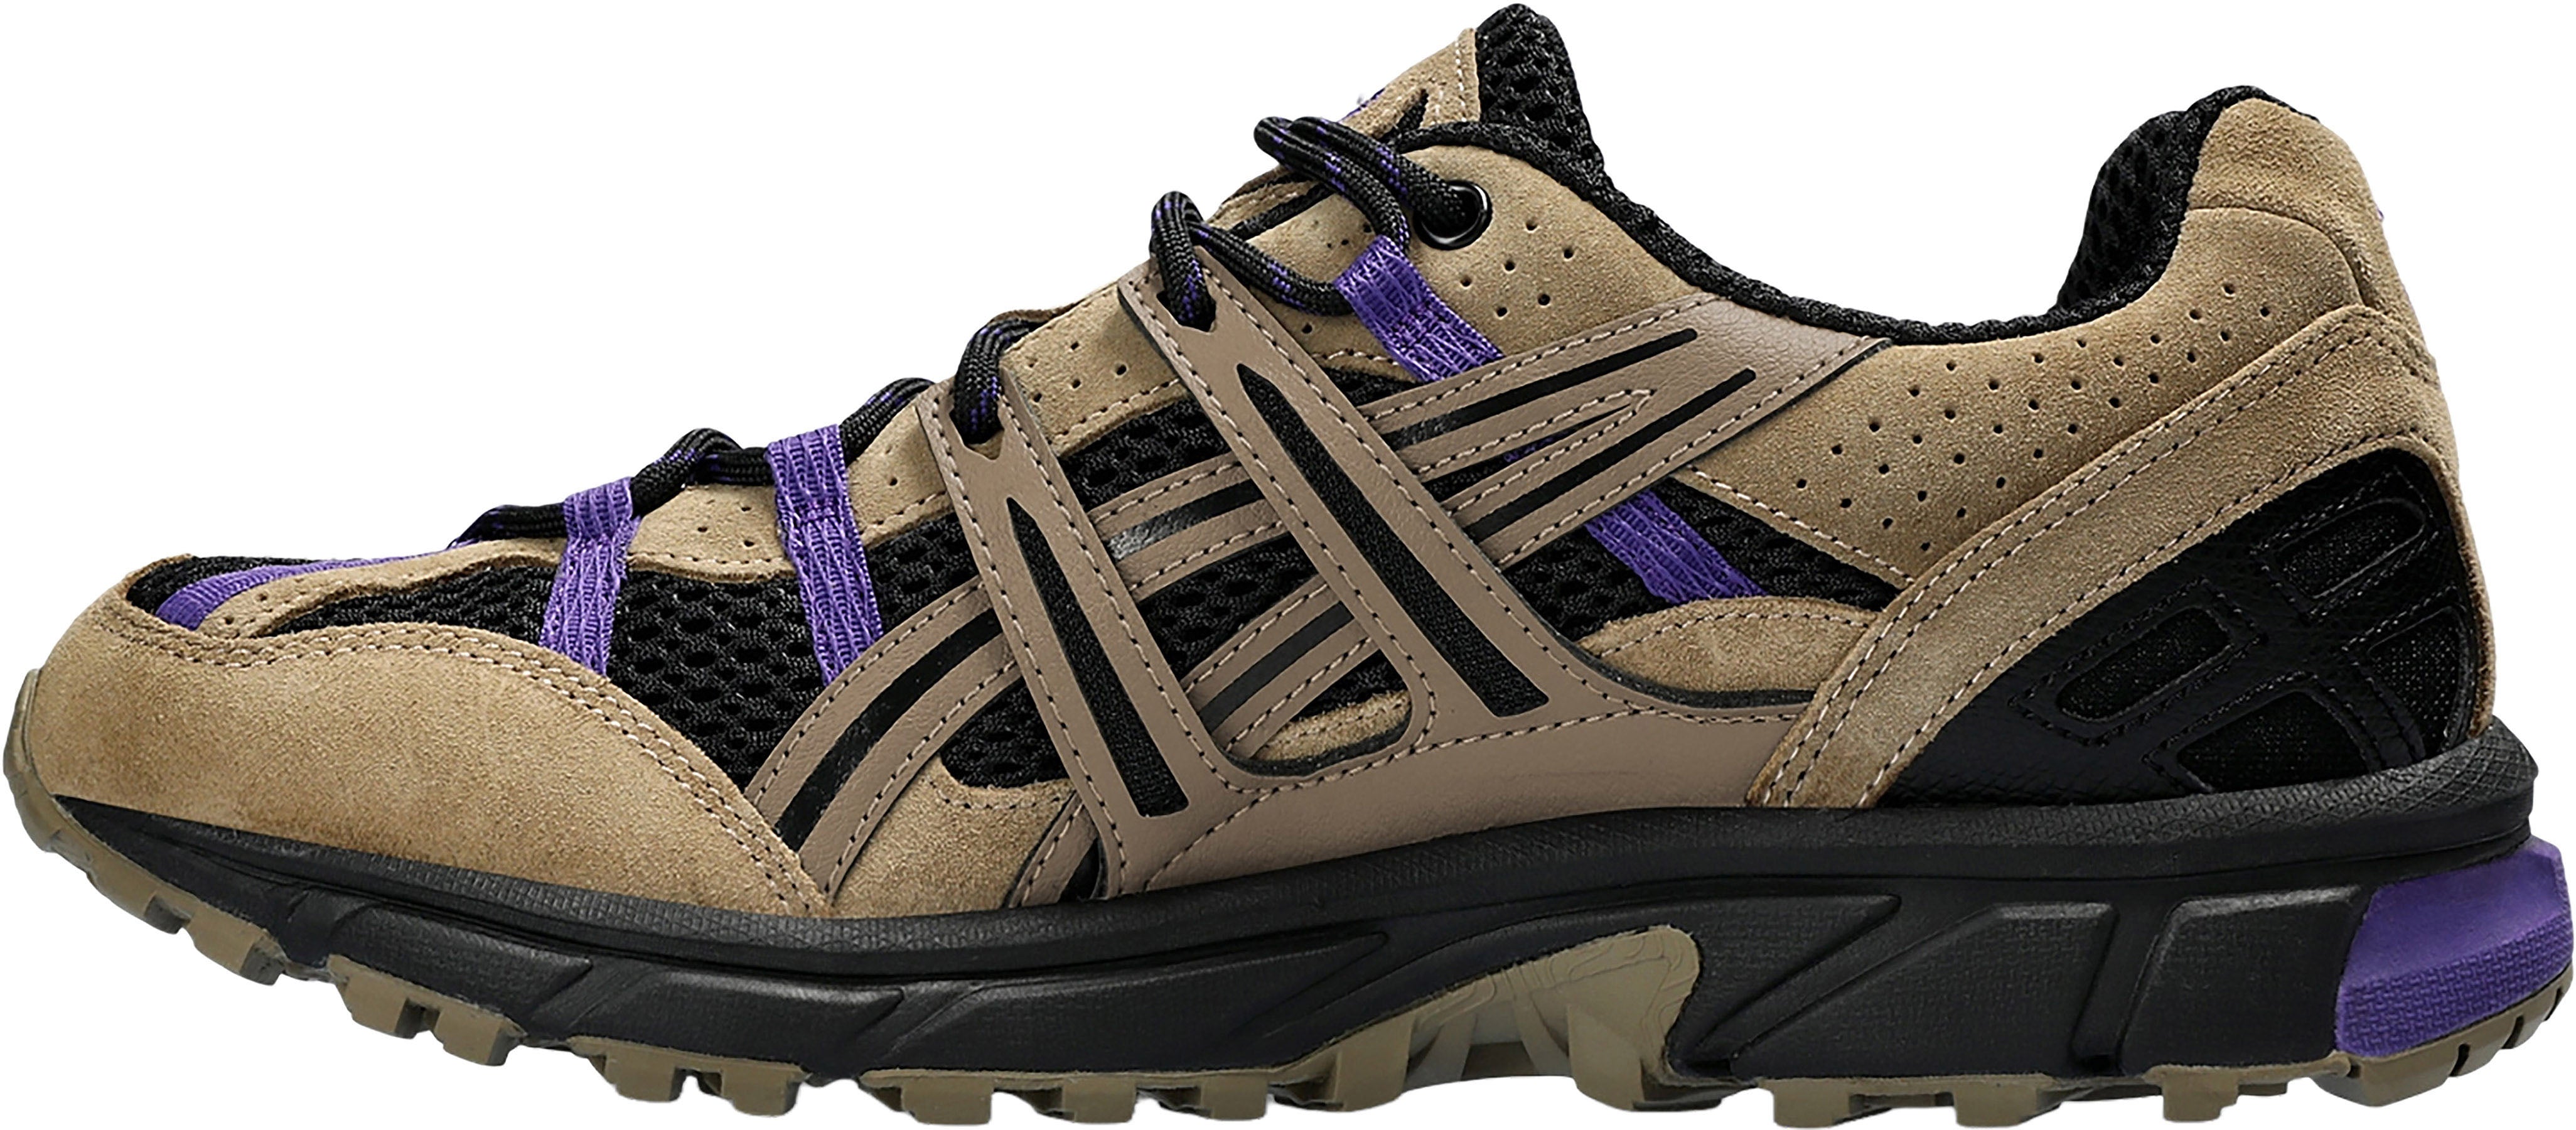 CHAUSSURES ASICS GEL TRABUCO 11 GOLDEN YELLOW/BLACK POUR HOMMES